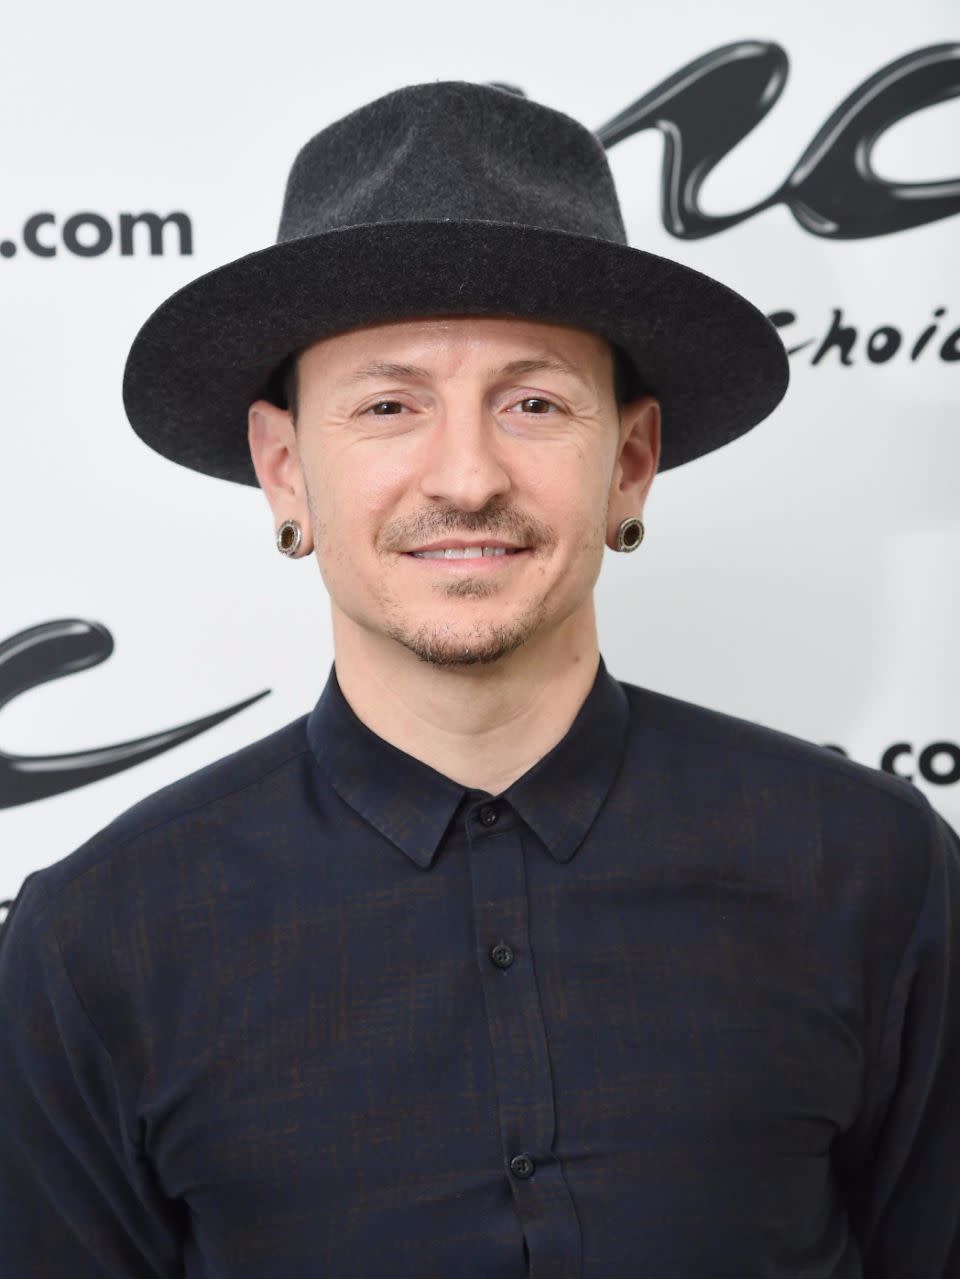 We remember rock legend Chester Bennington who tragically died yesterday at the age of 41. Source: Getty